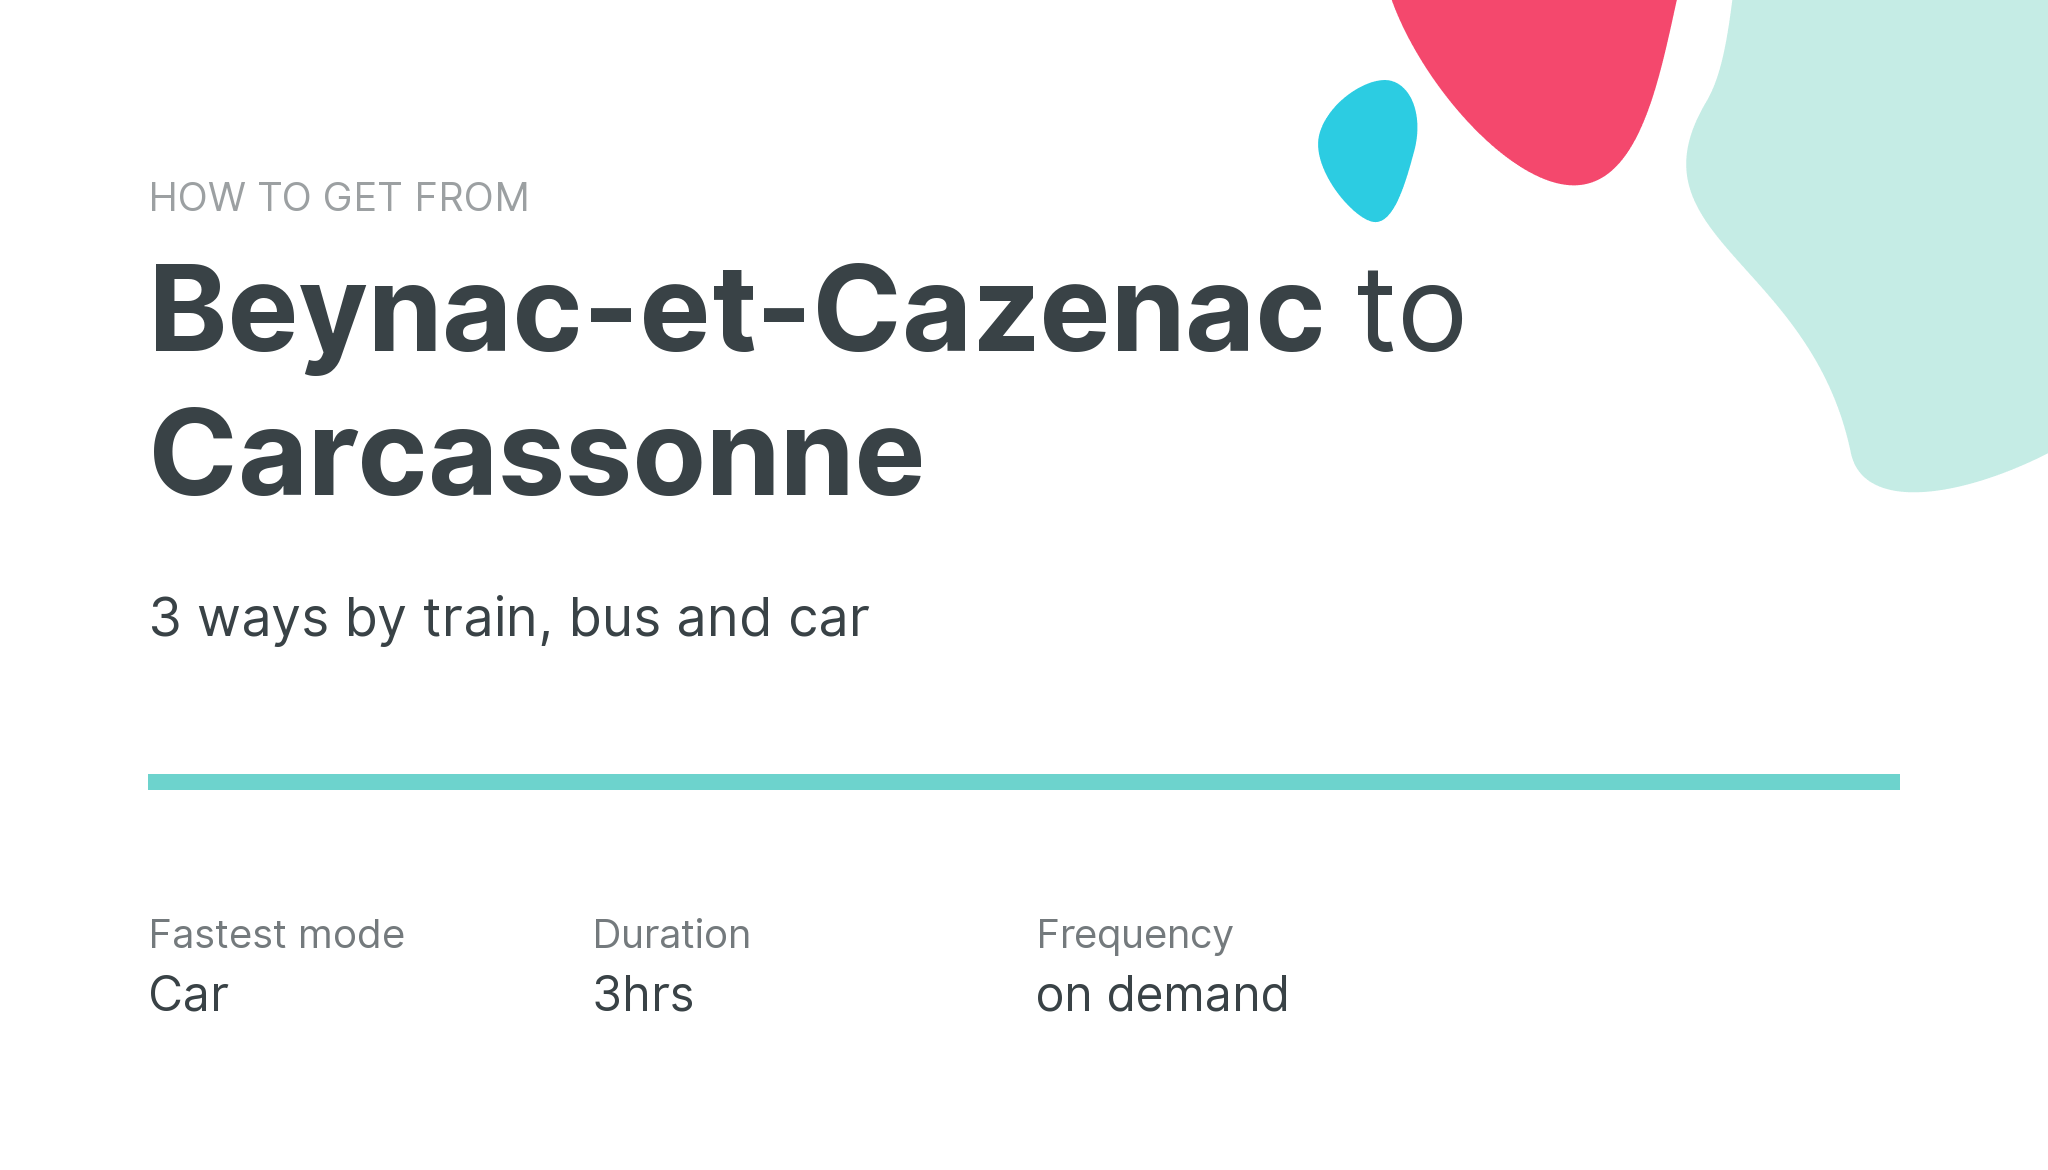 How do I get from Beynac-et-Cazenac to Carcassonne